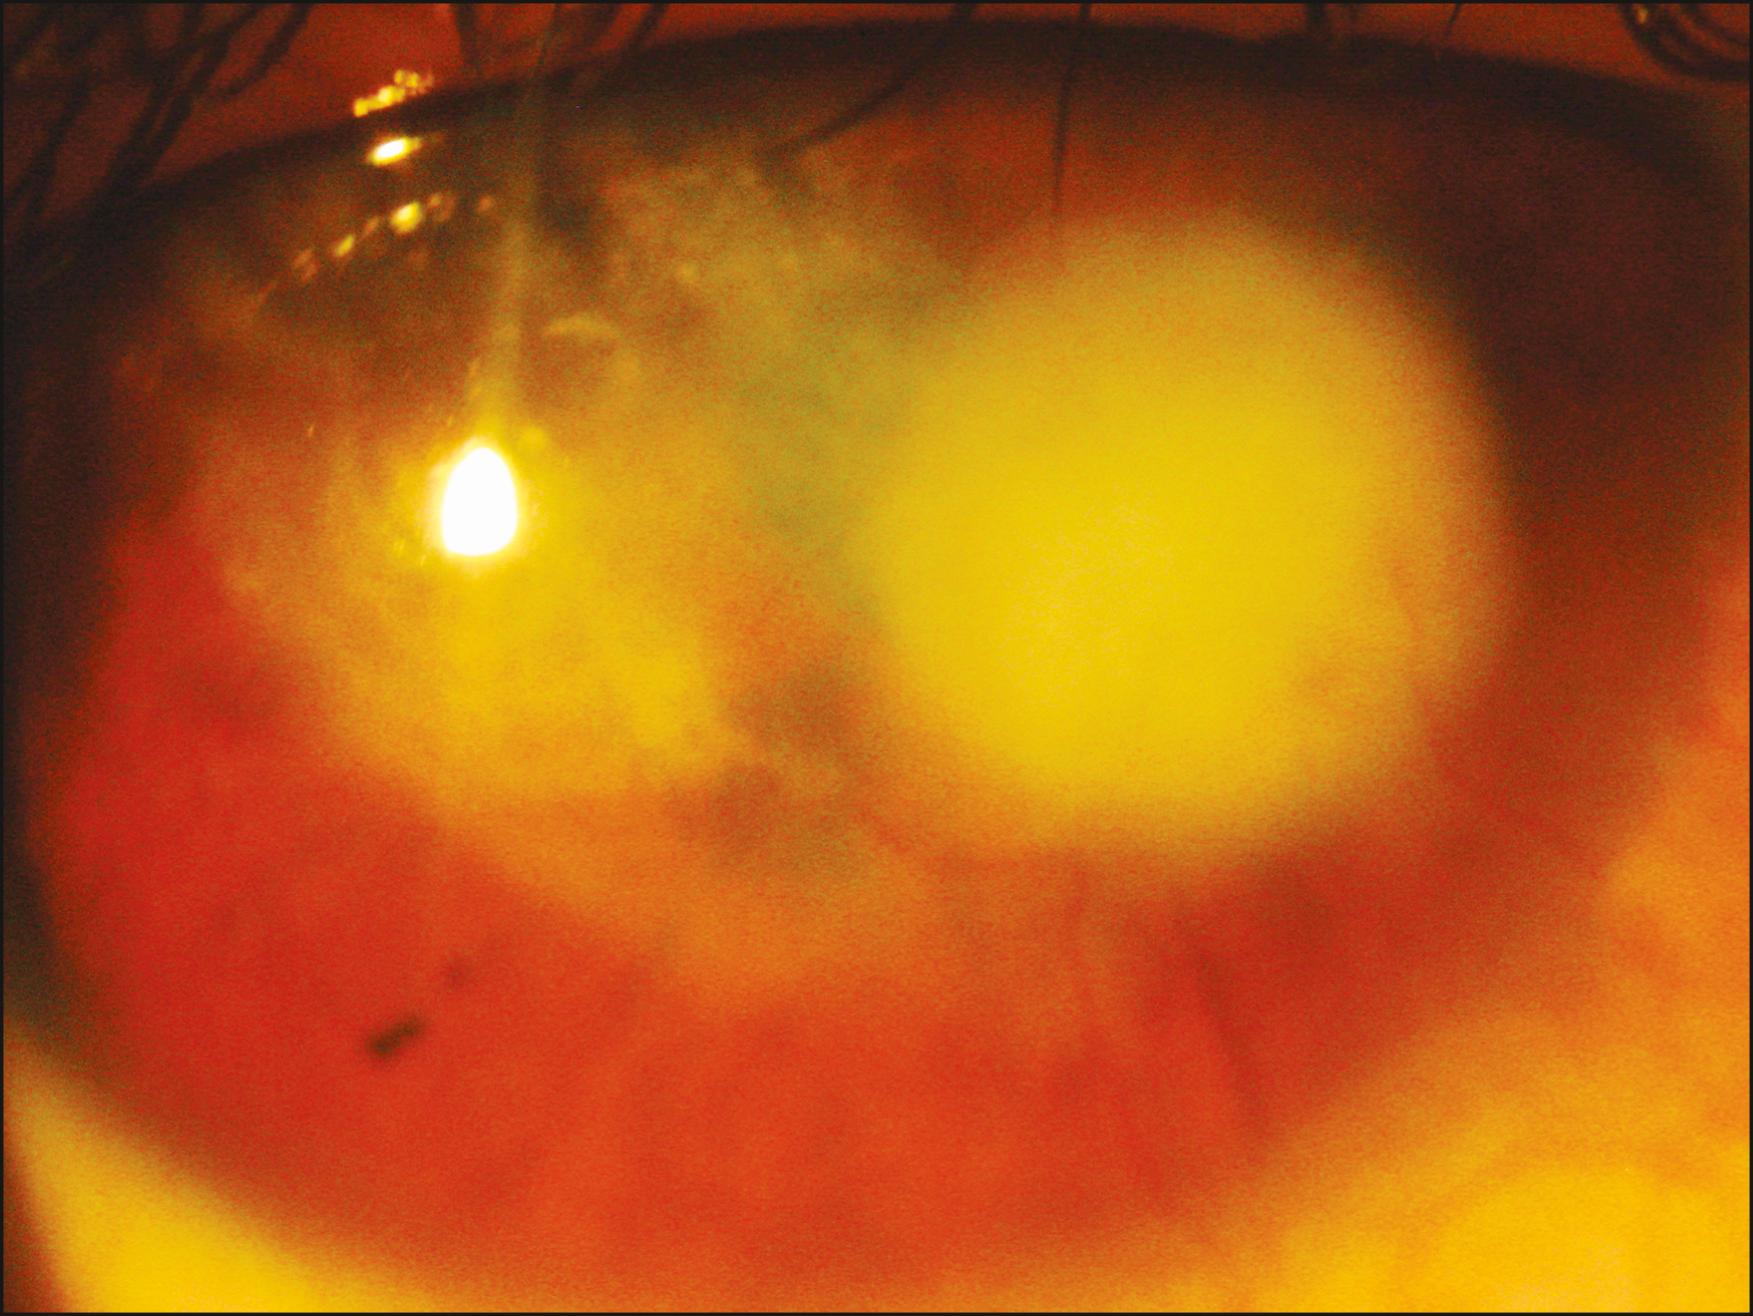 Fig. 85.1, Late stage of tuberculosis interstitial keratitis with marked corneal scarring and loss of transparency, compromising best corrected visual acuity.